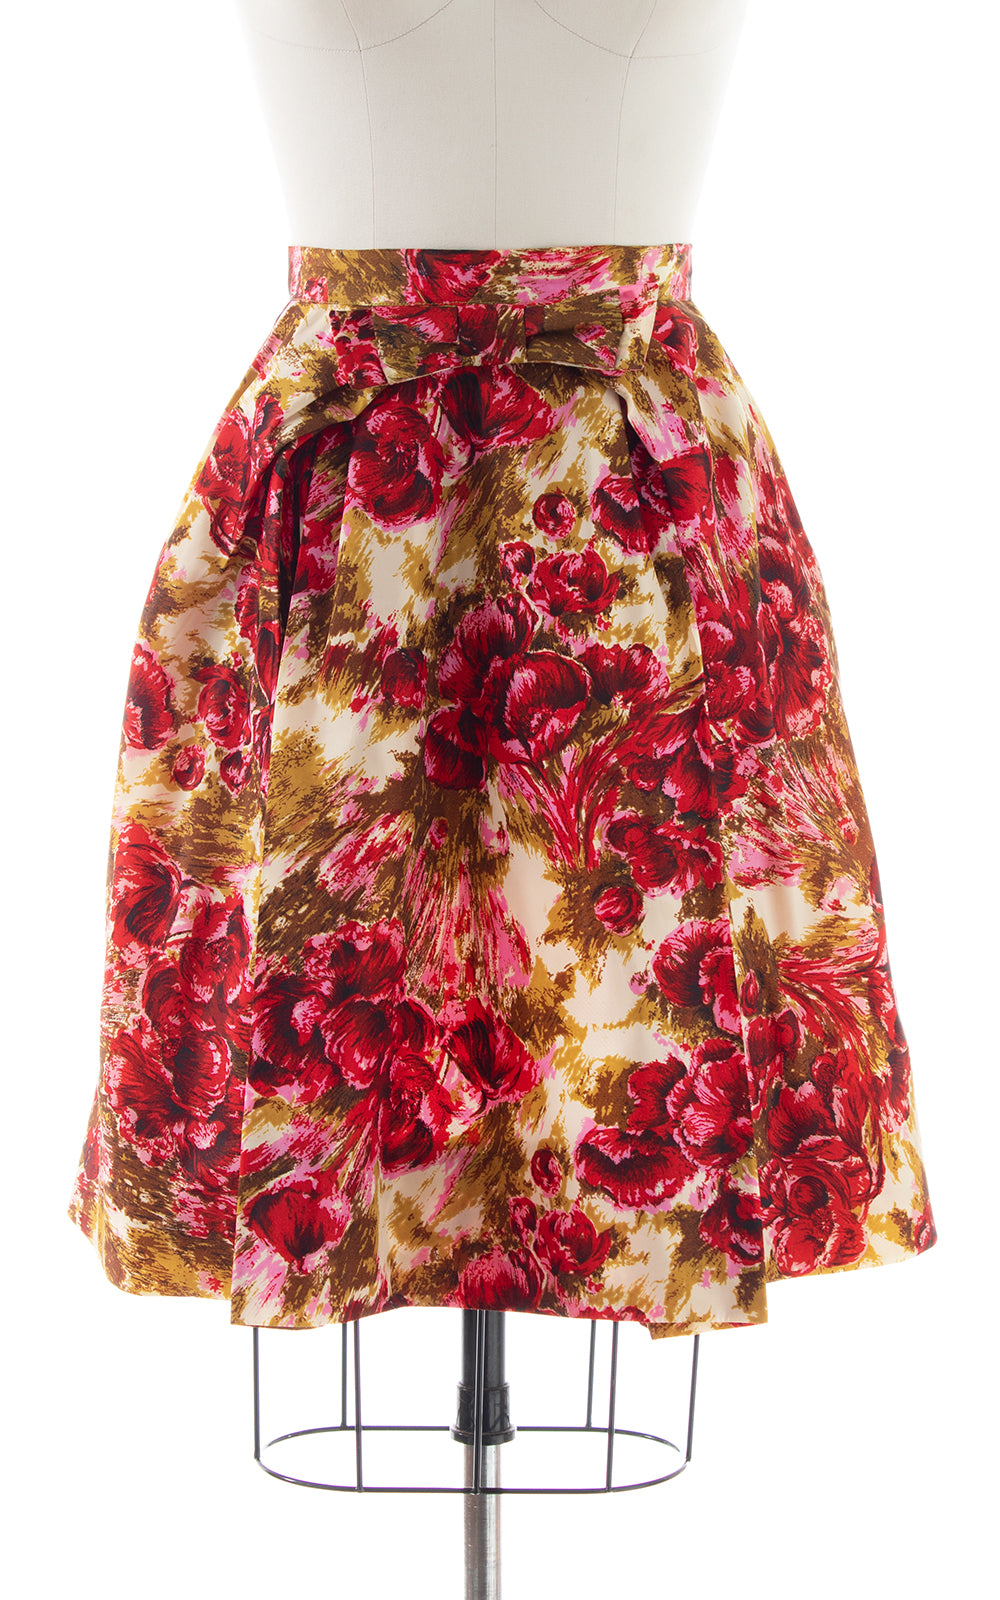 1950s Floral Skirt with Bow BirthdayLifeVintage